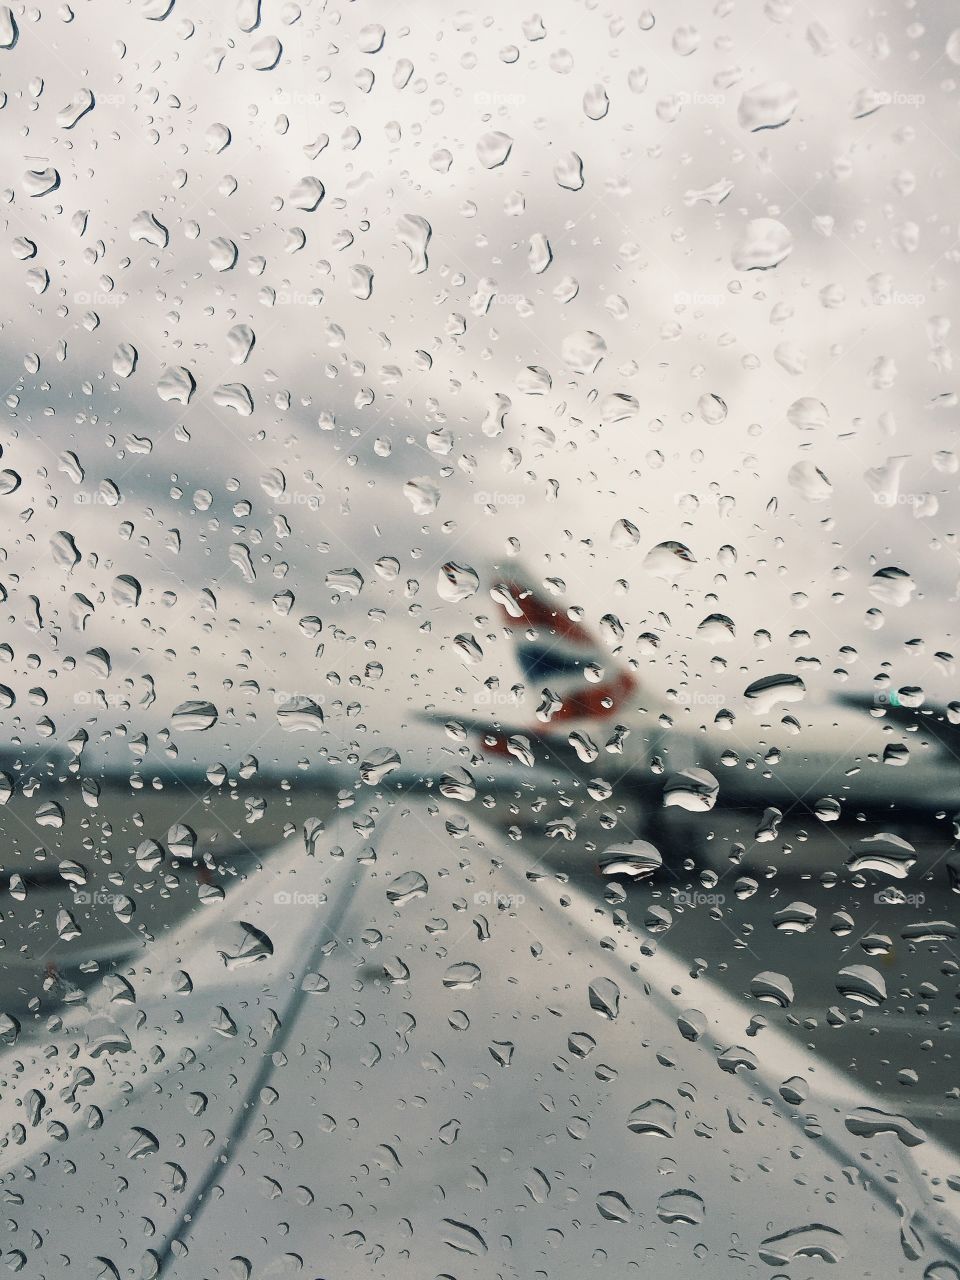 Rain drops on window in airplane. A picture taken on a rainy day in Heathrow 